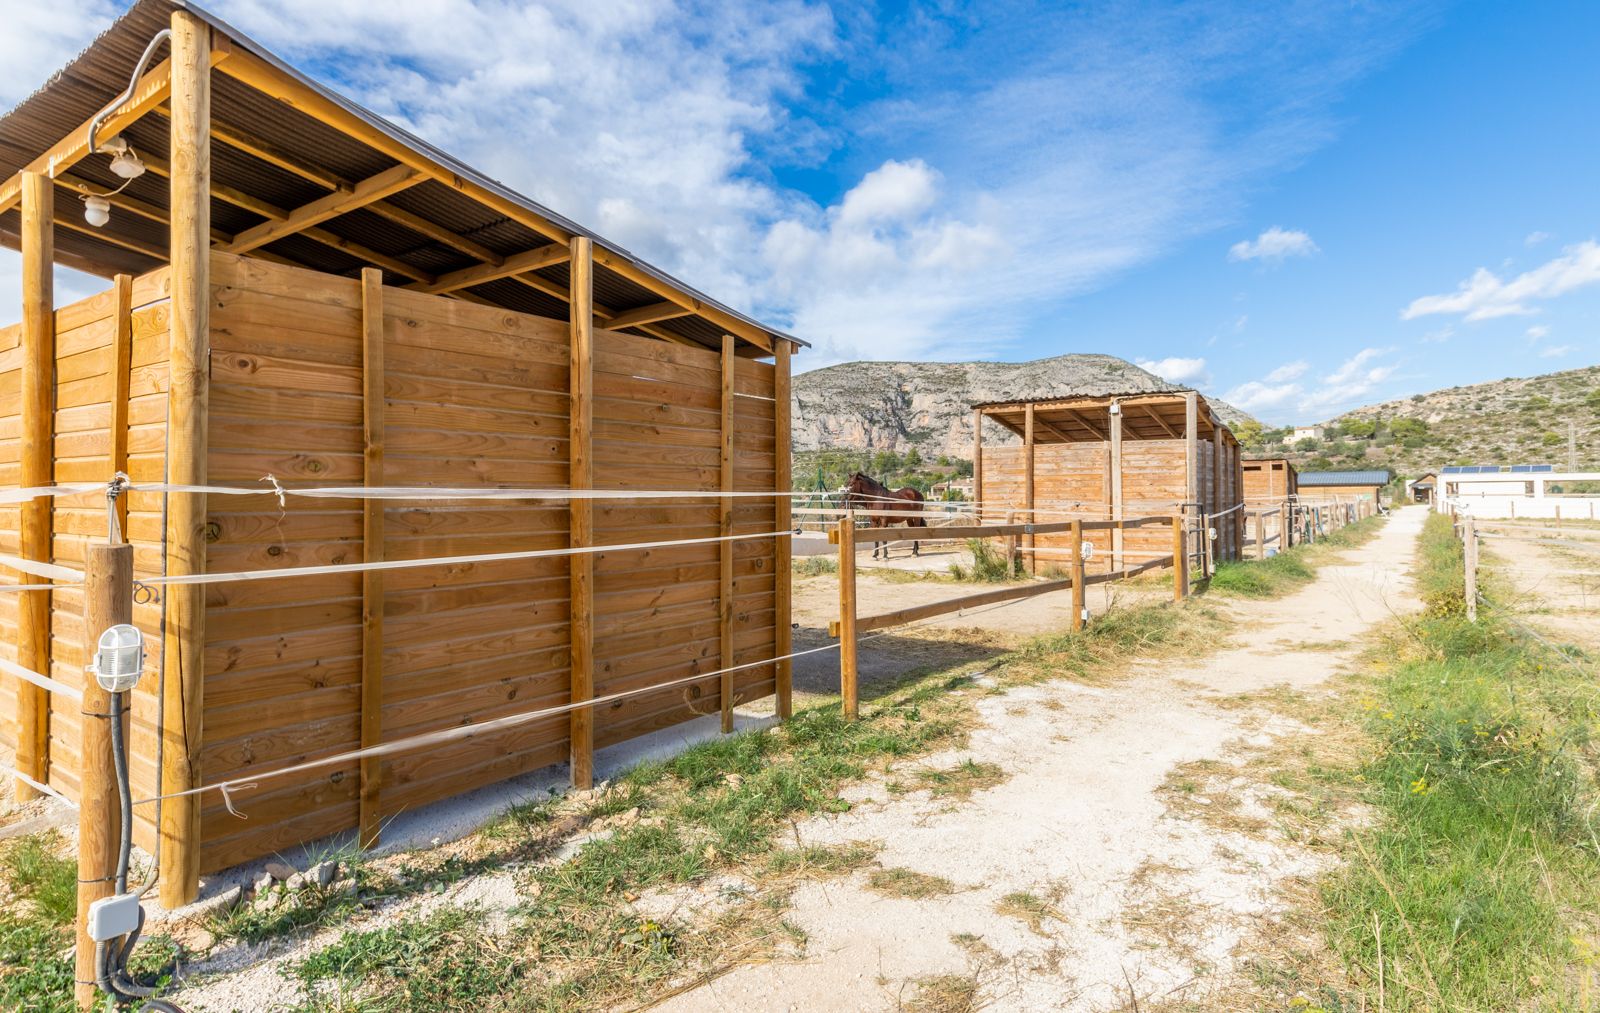 Investment opportunity, active equestrian center for sale in Teulada